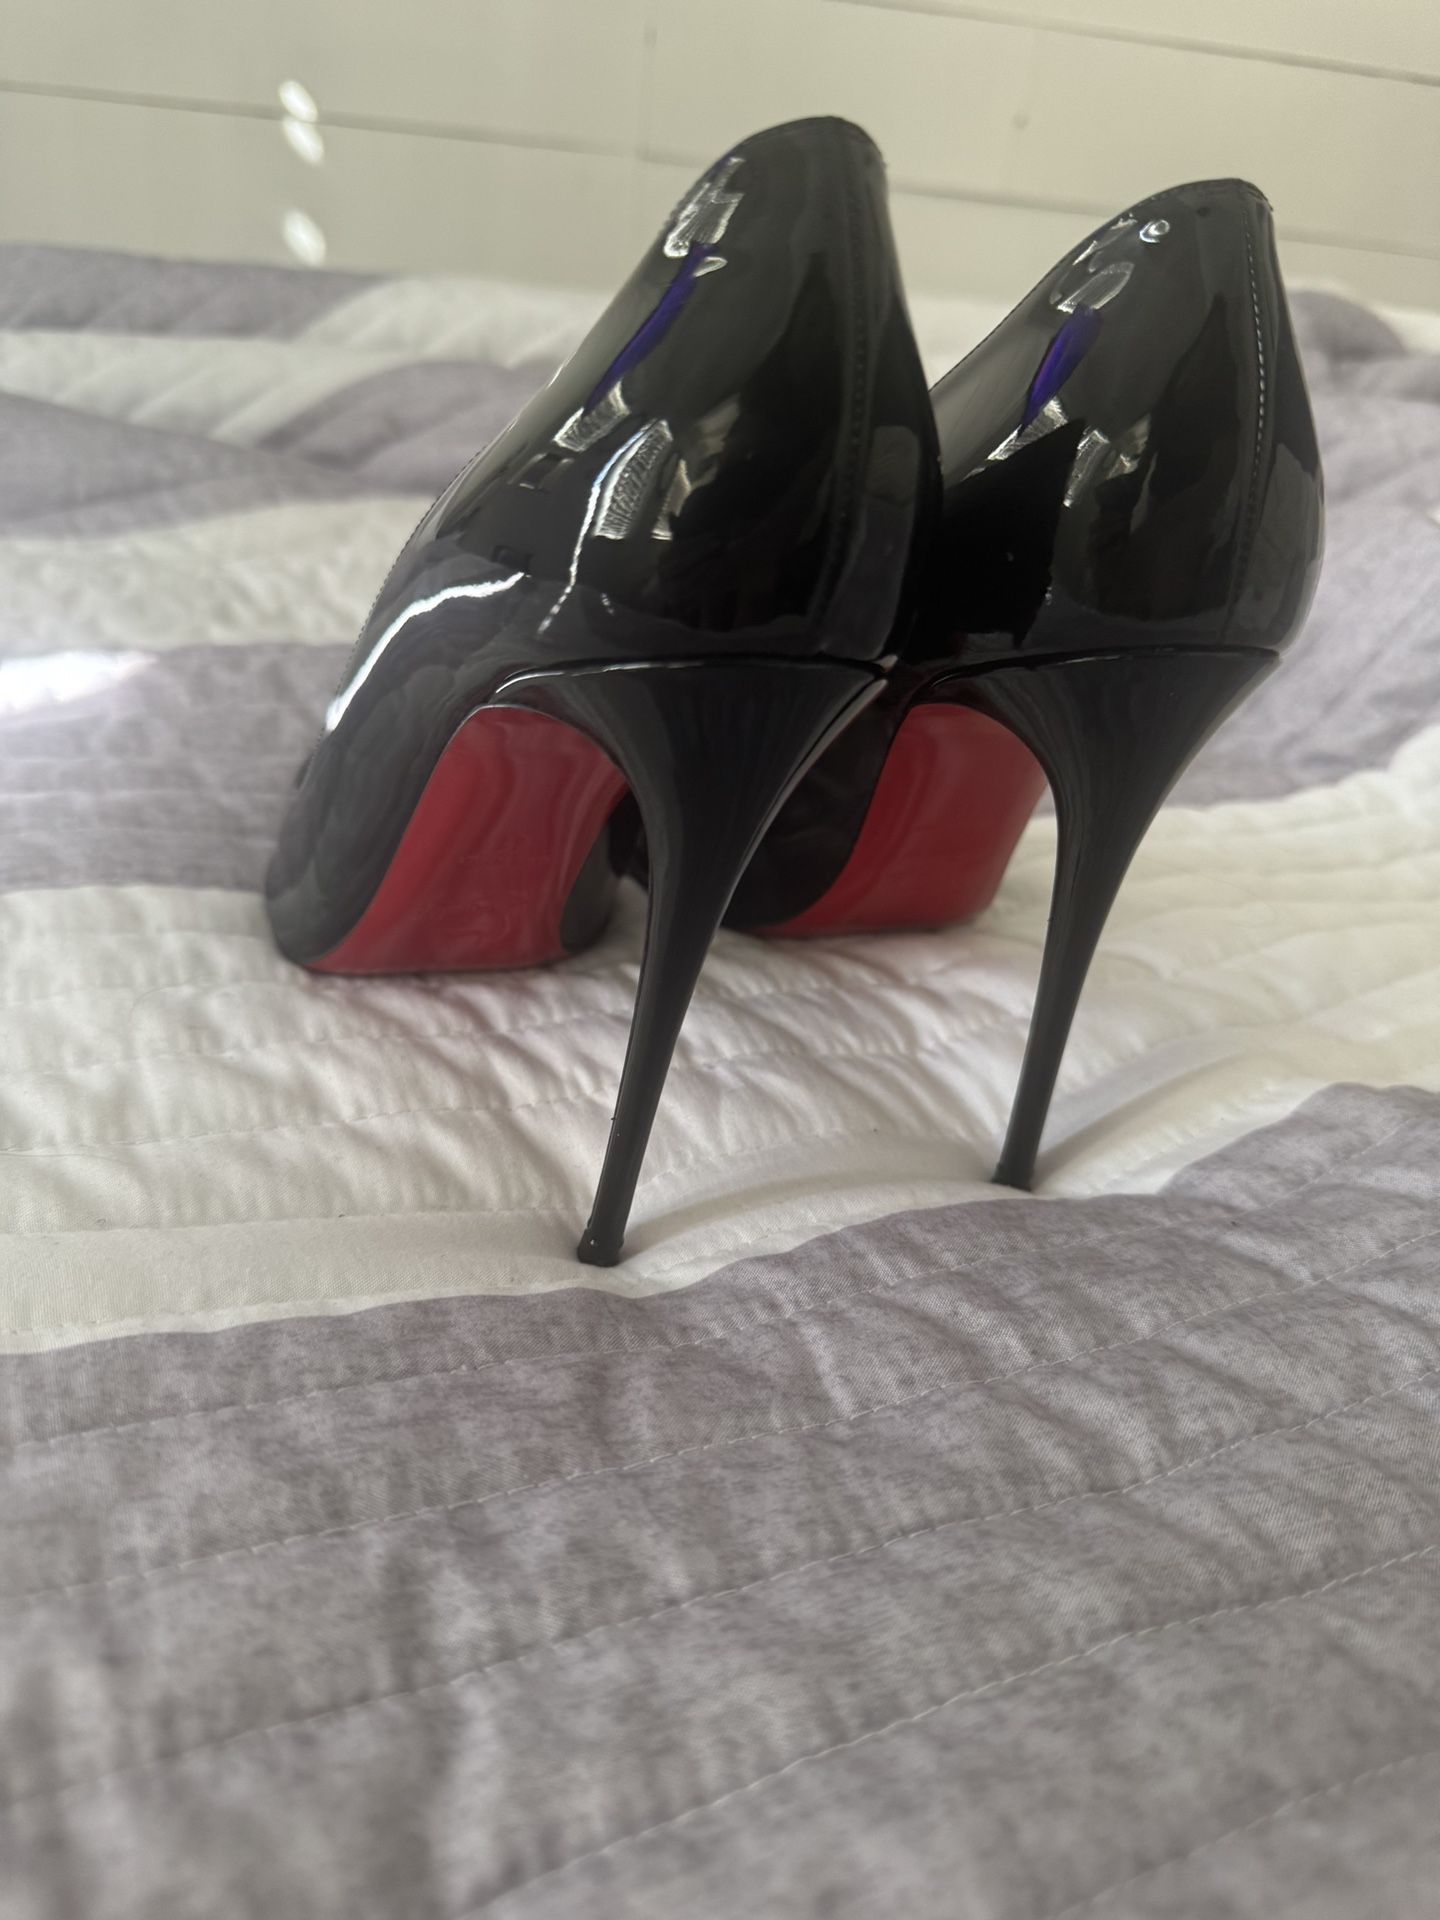 Authentic Louboutin “red bottom” Heels